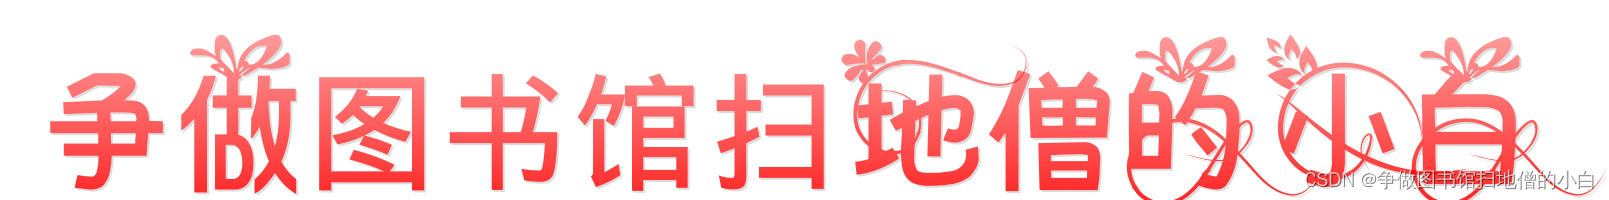 C++笔记汇总（<span style='color:red;'>随时</span><span style='color:red;'>更新</span>）